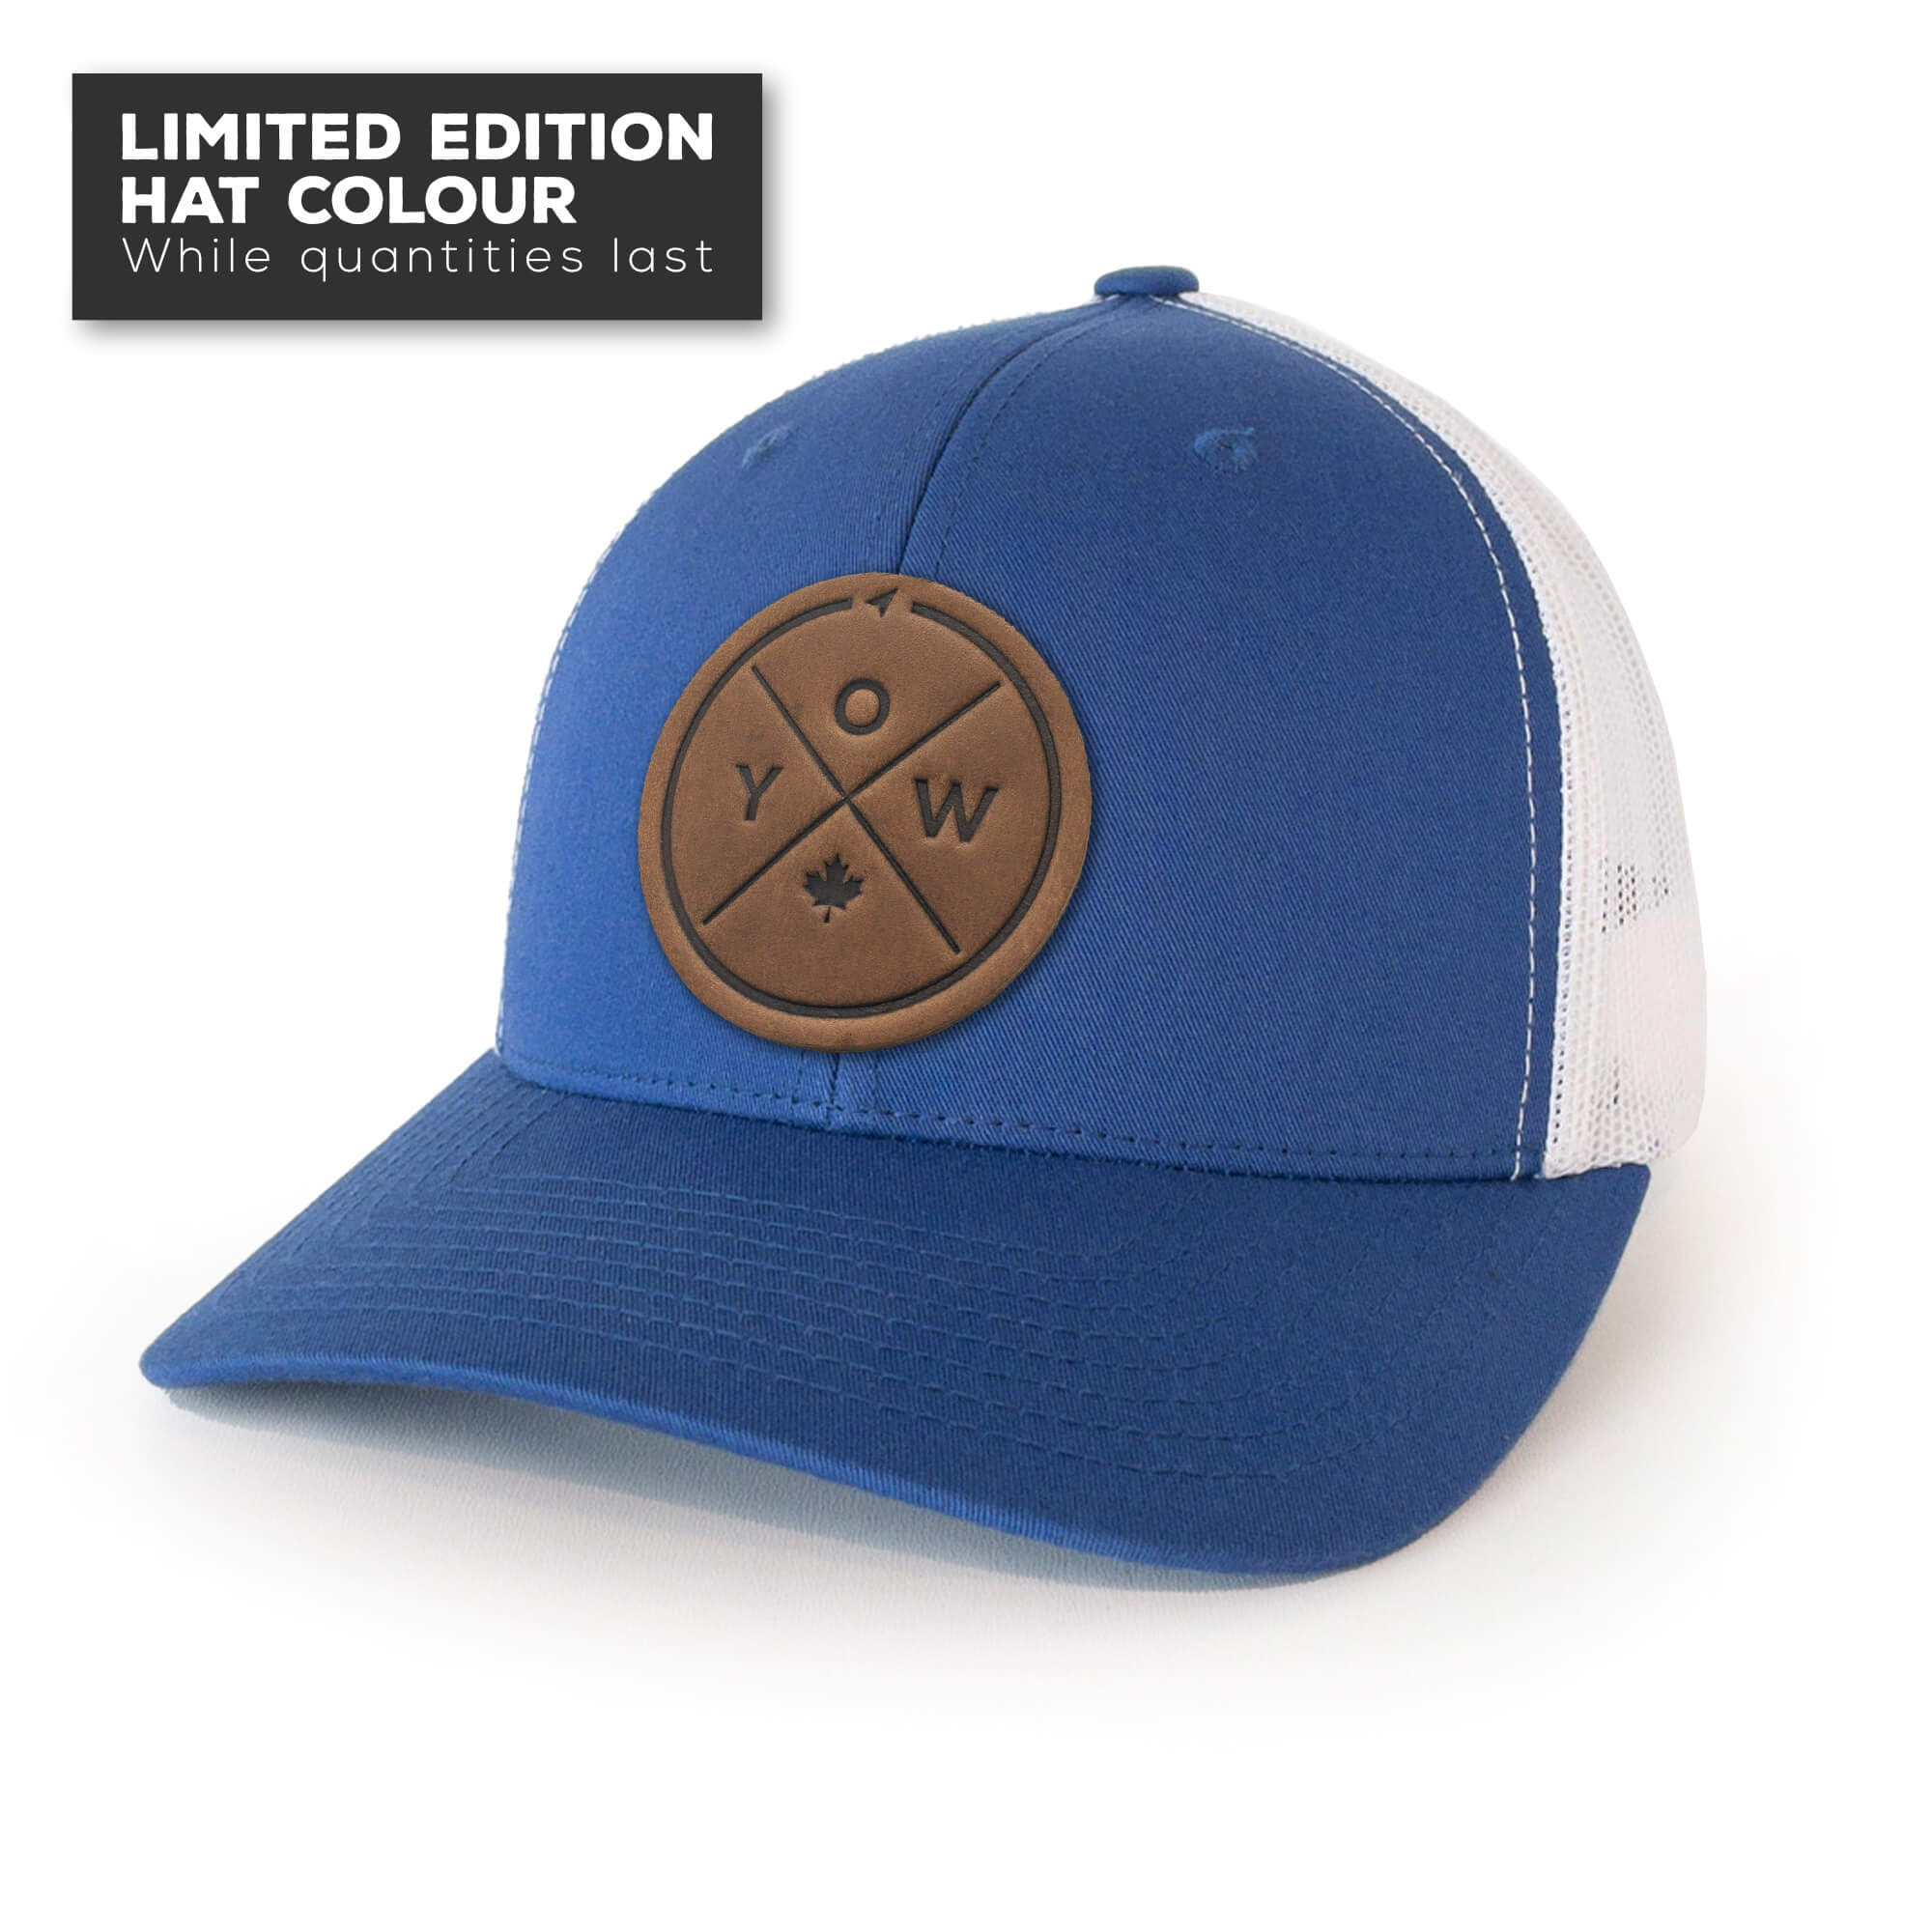 Royal Blue trucker hat with full-grain leather patch of YOW Compass